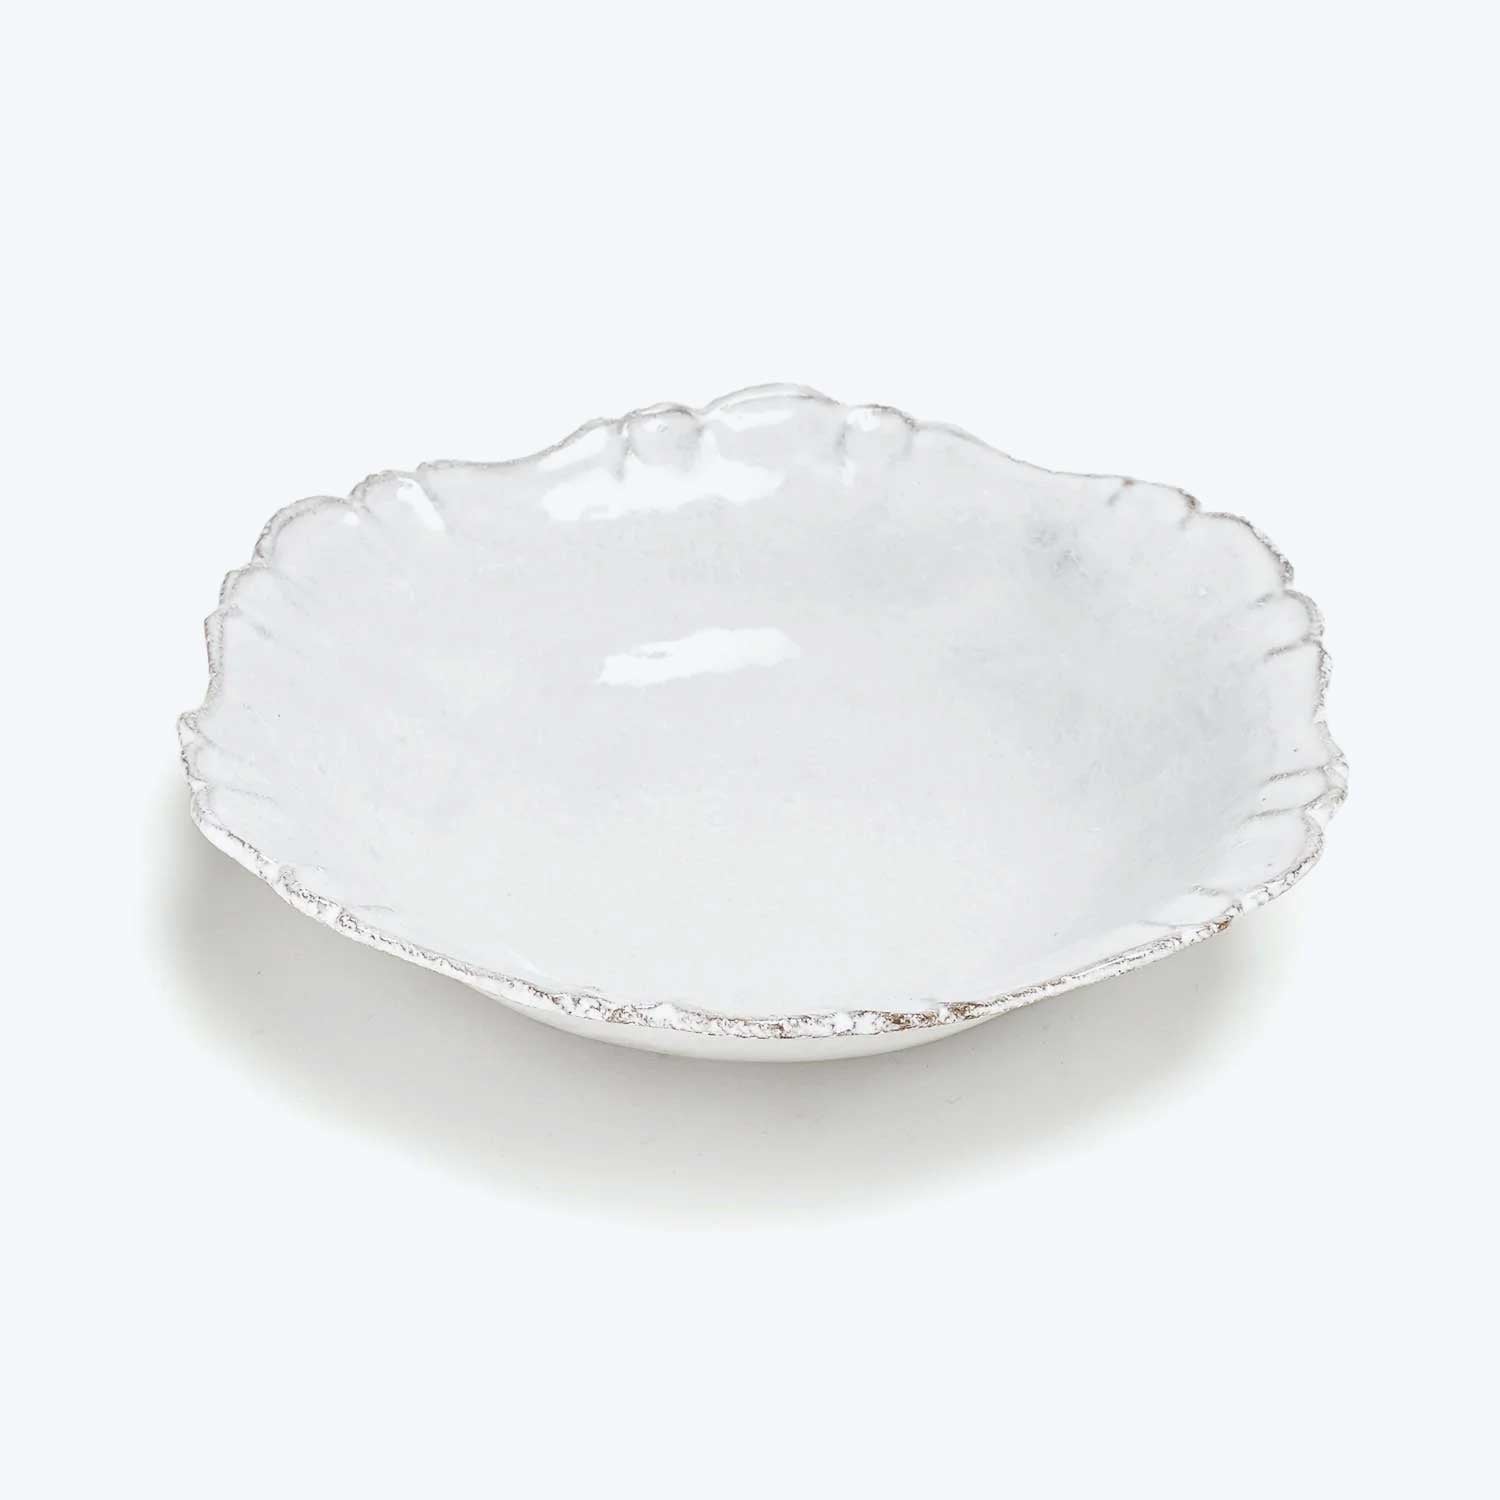 Shallow Footed Serving Bowl